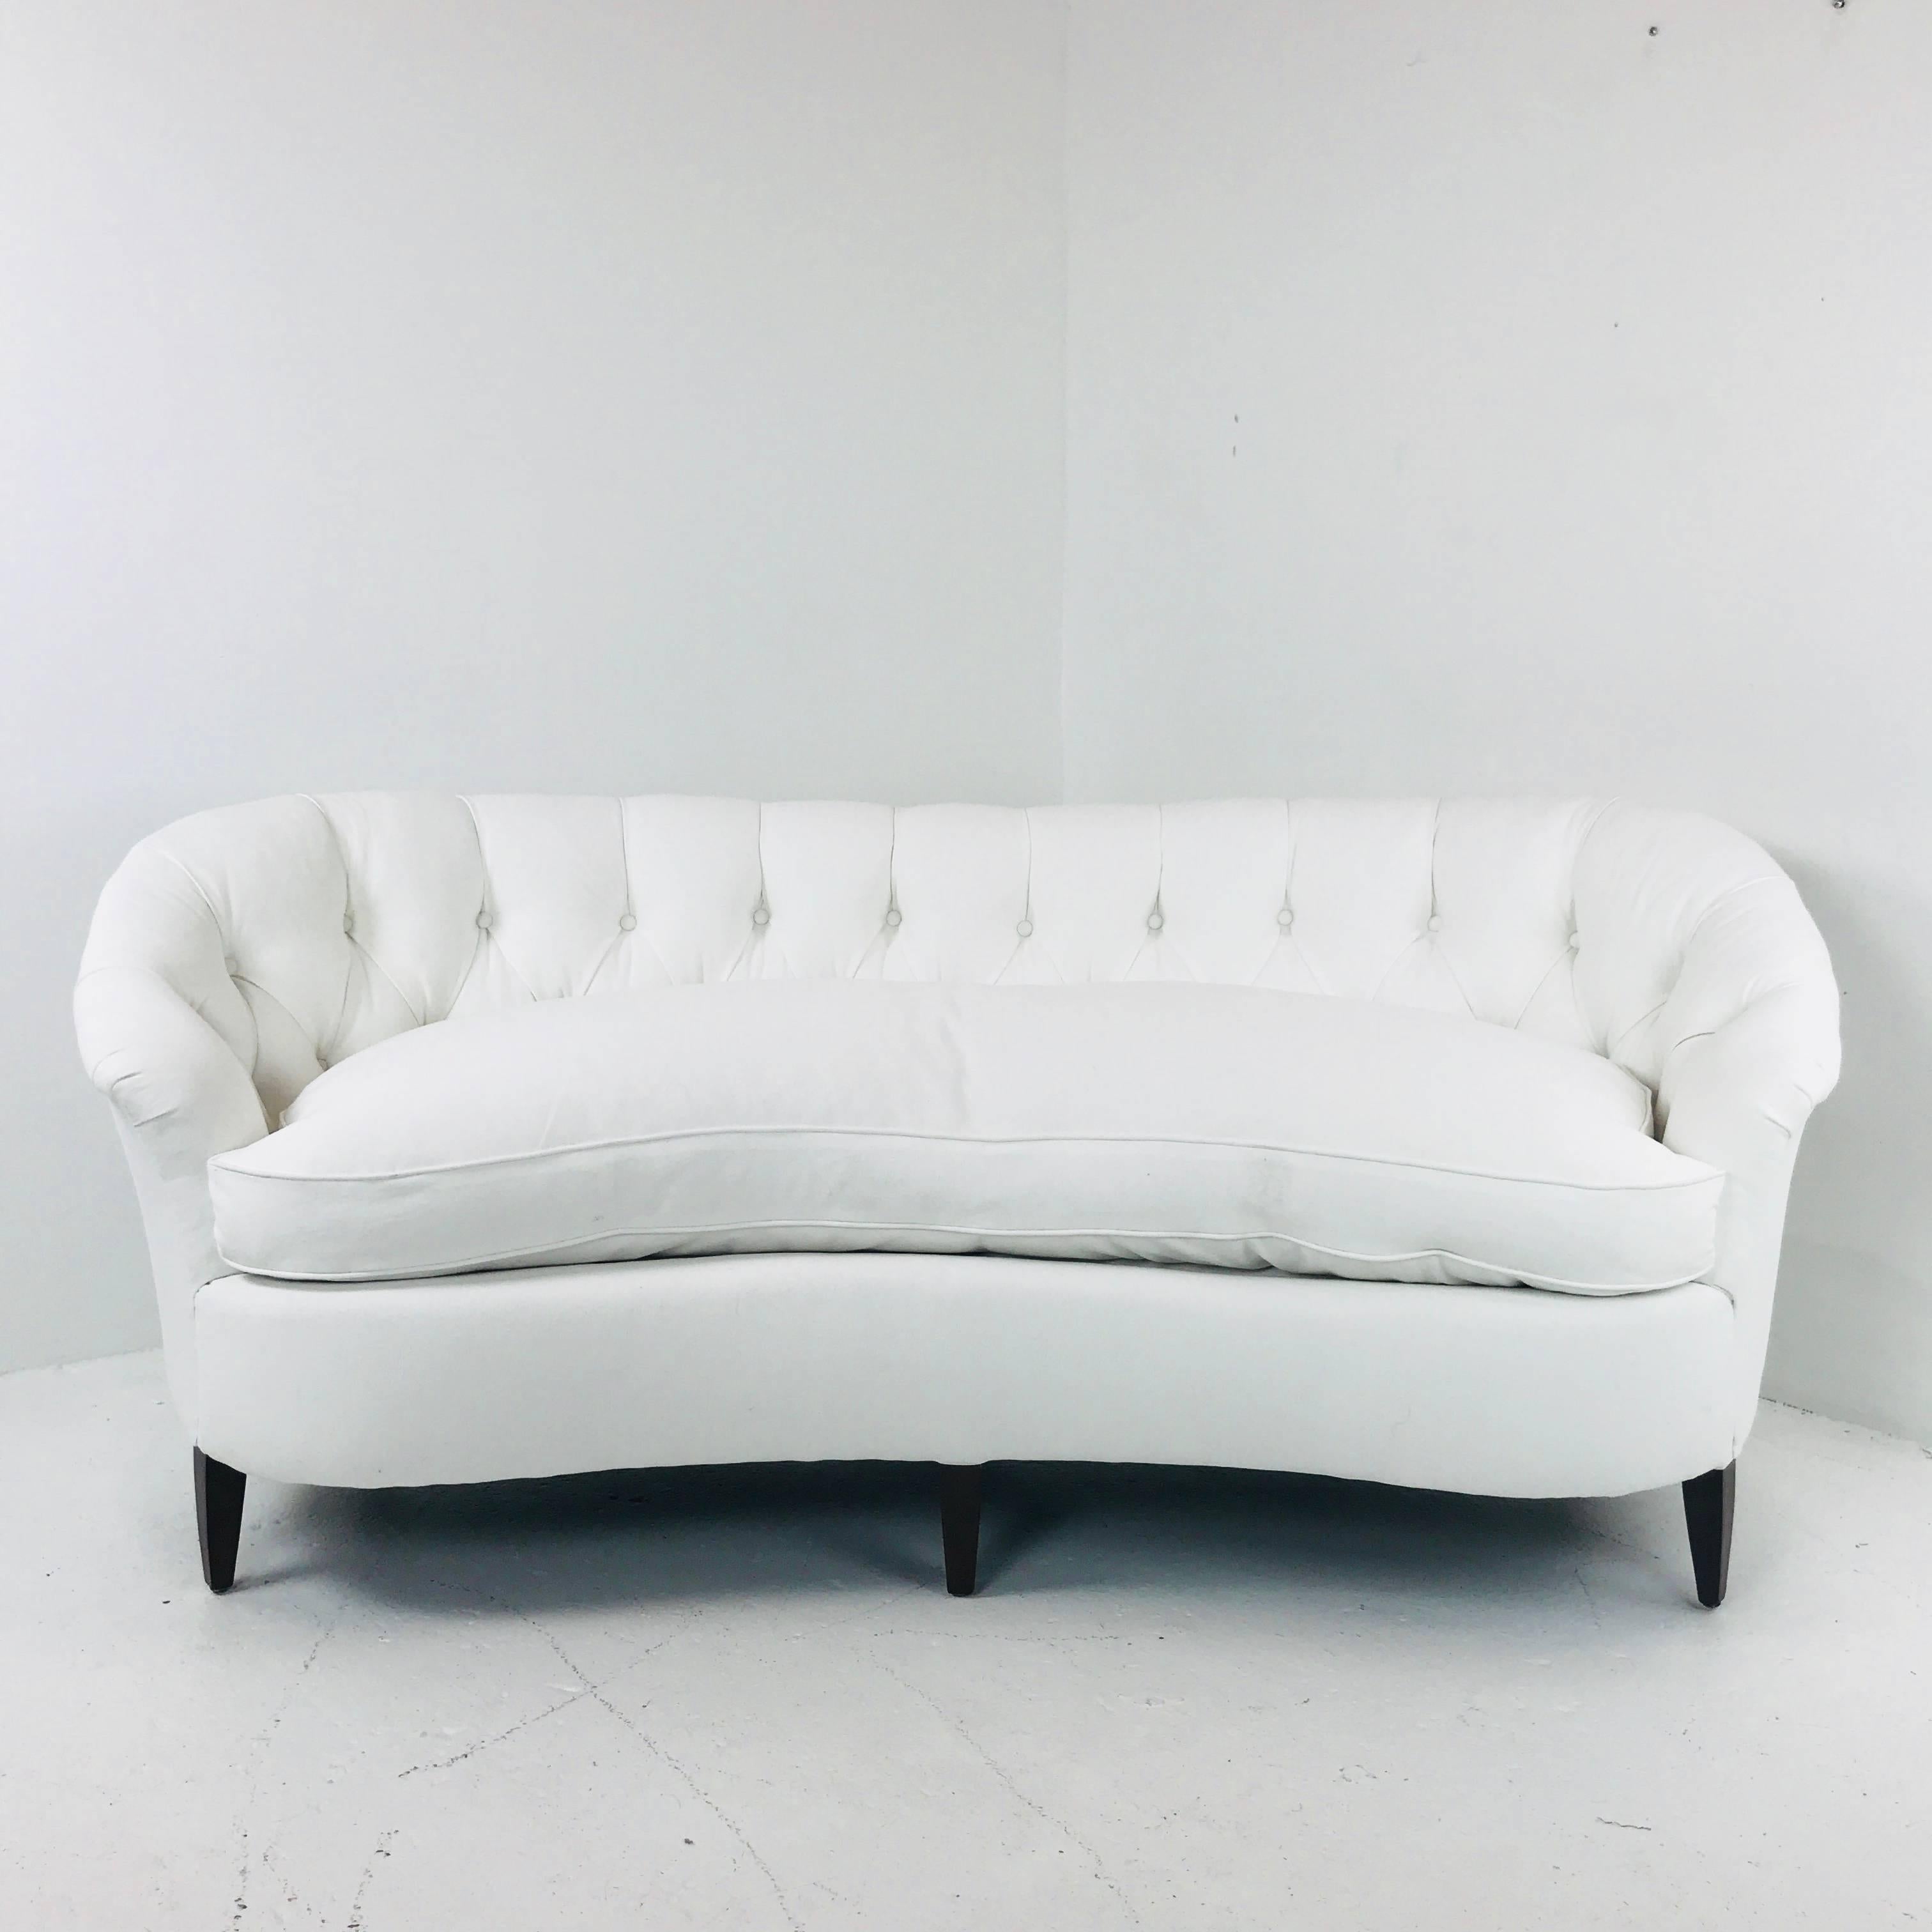 White tufted curved regency petite sofa. Sofa was recently upholstered in March 2018. Sofa is in excellent condition. 

Dimensions: 73